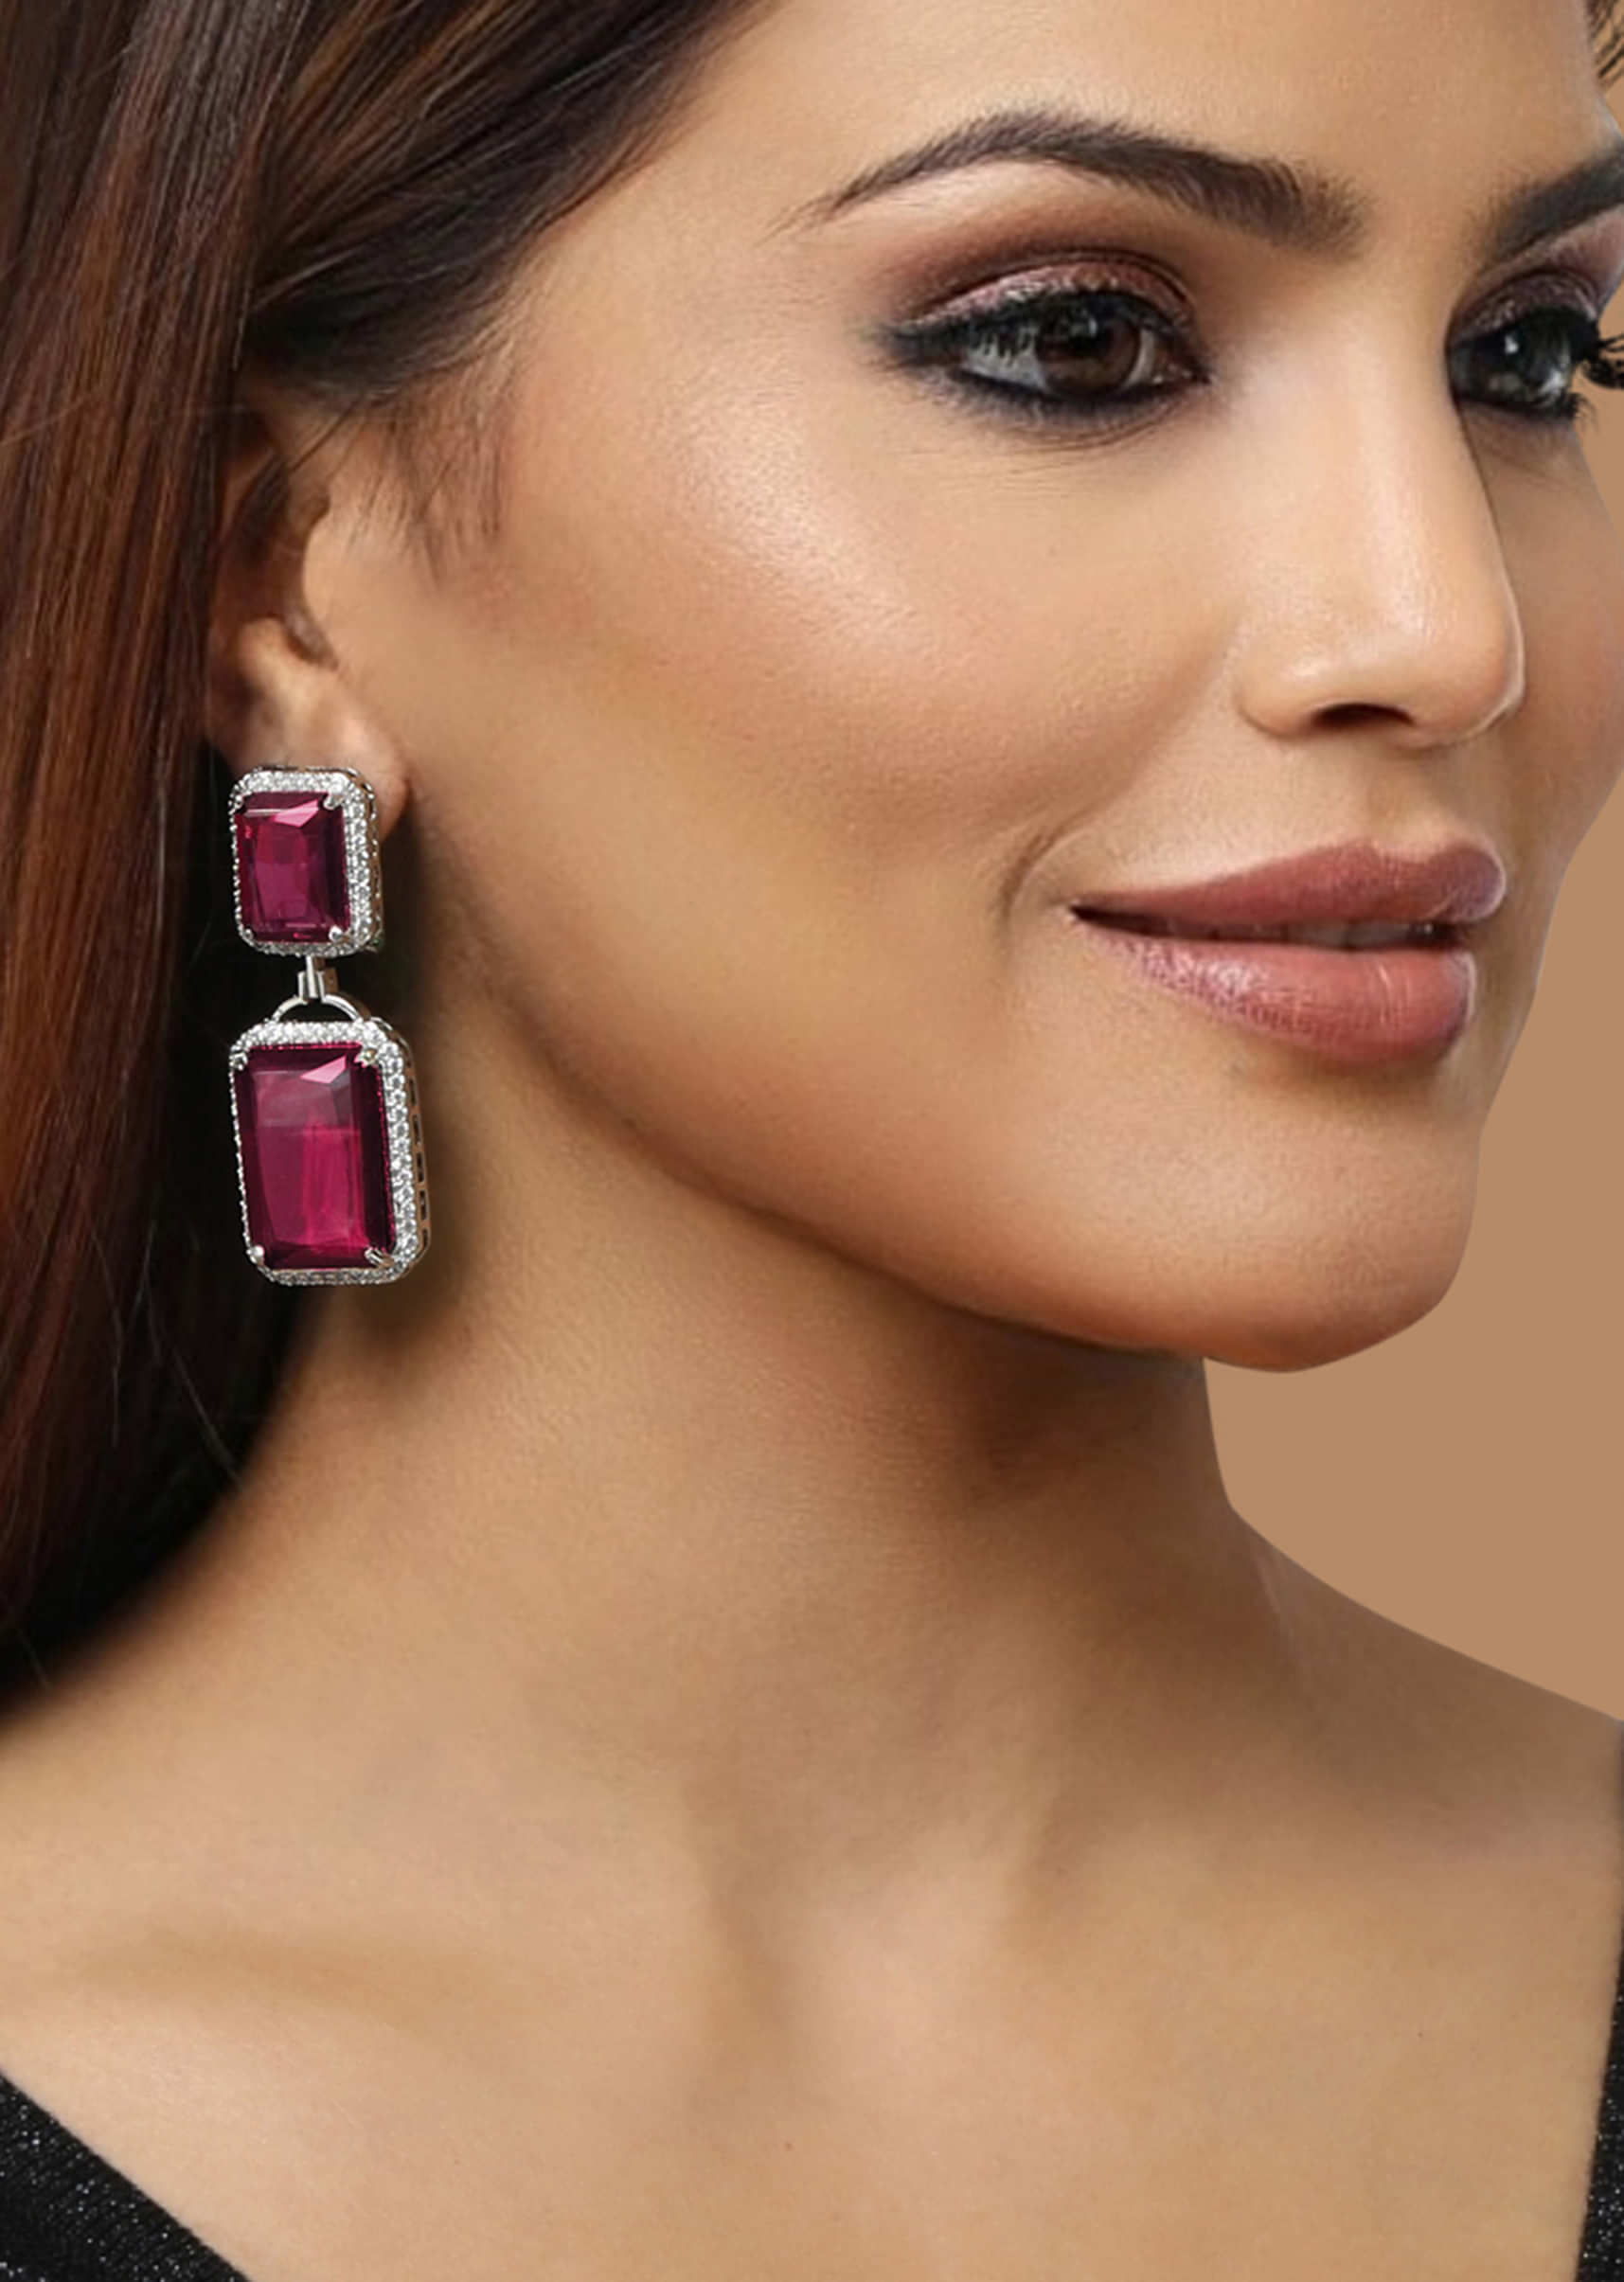 2 Red Stones Dangled Earrings With Faux Diamonds